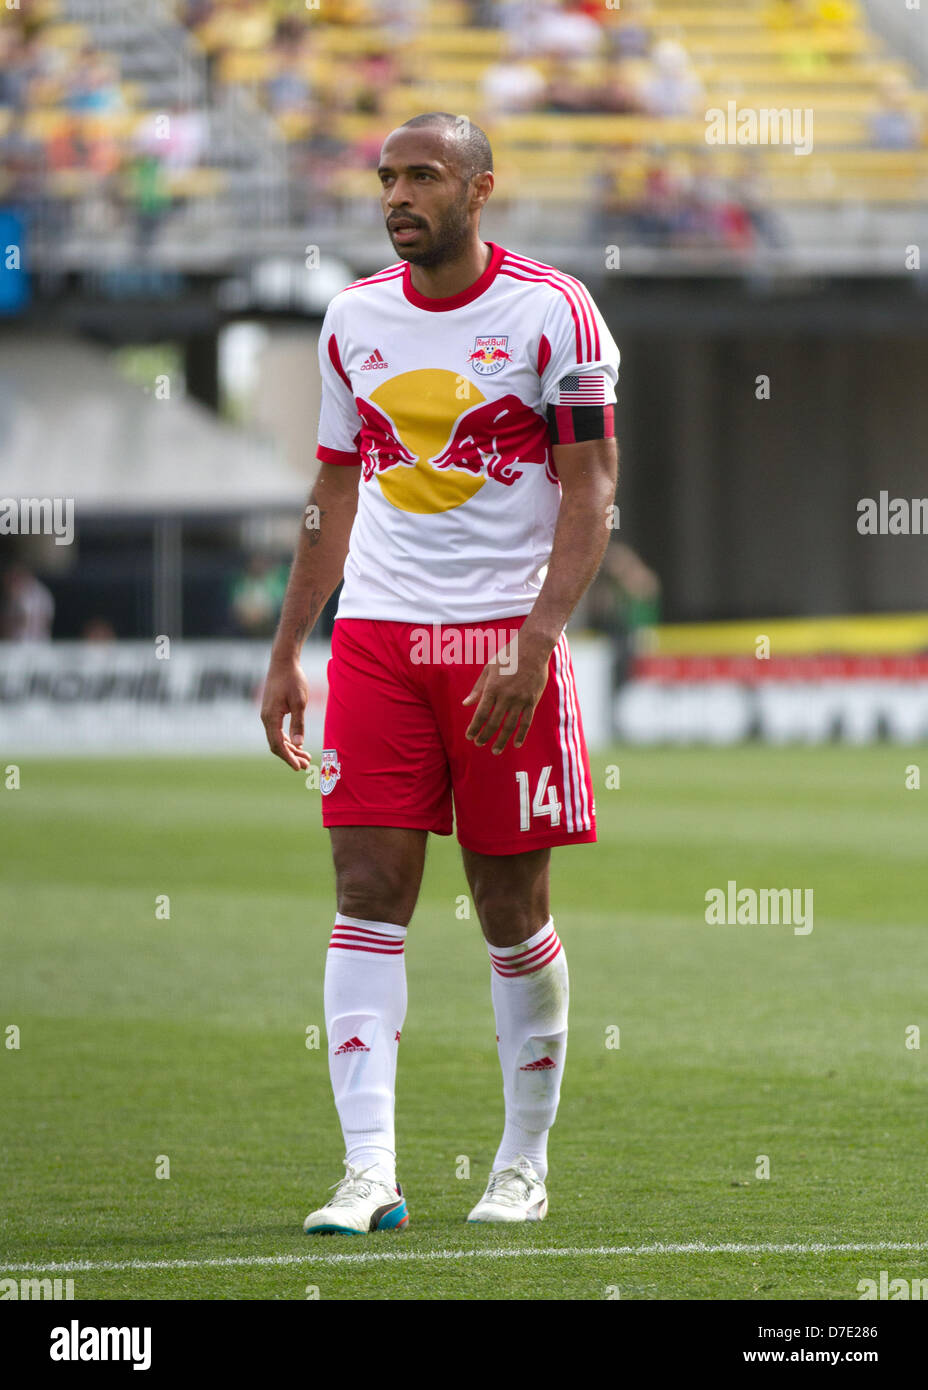 Thierry Henry goal celebration for New York Red Bulls sparks #henrying  trend on Twitter, The Independent